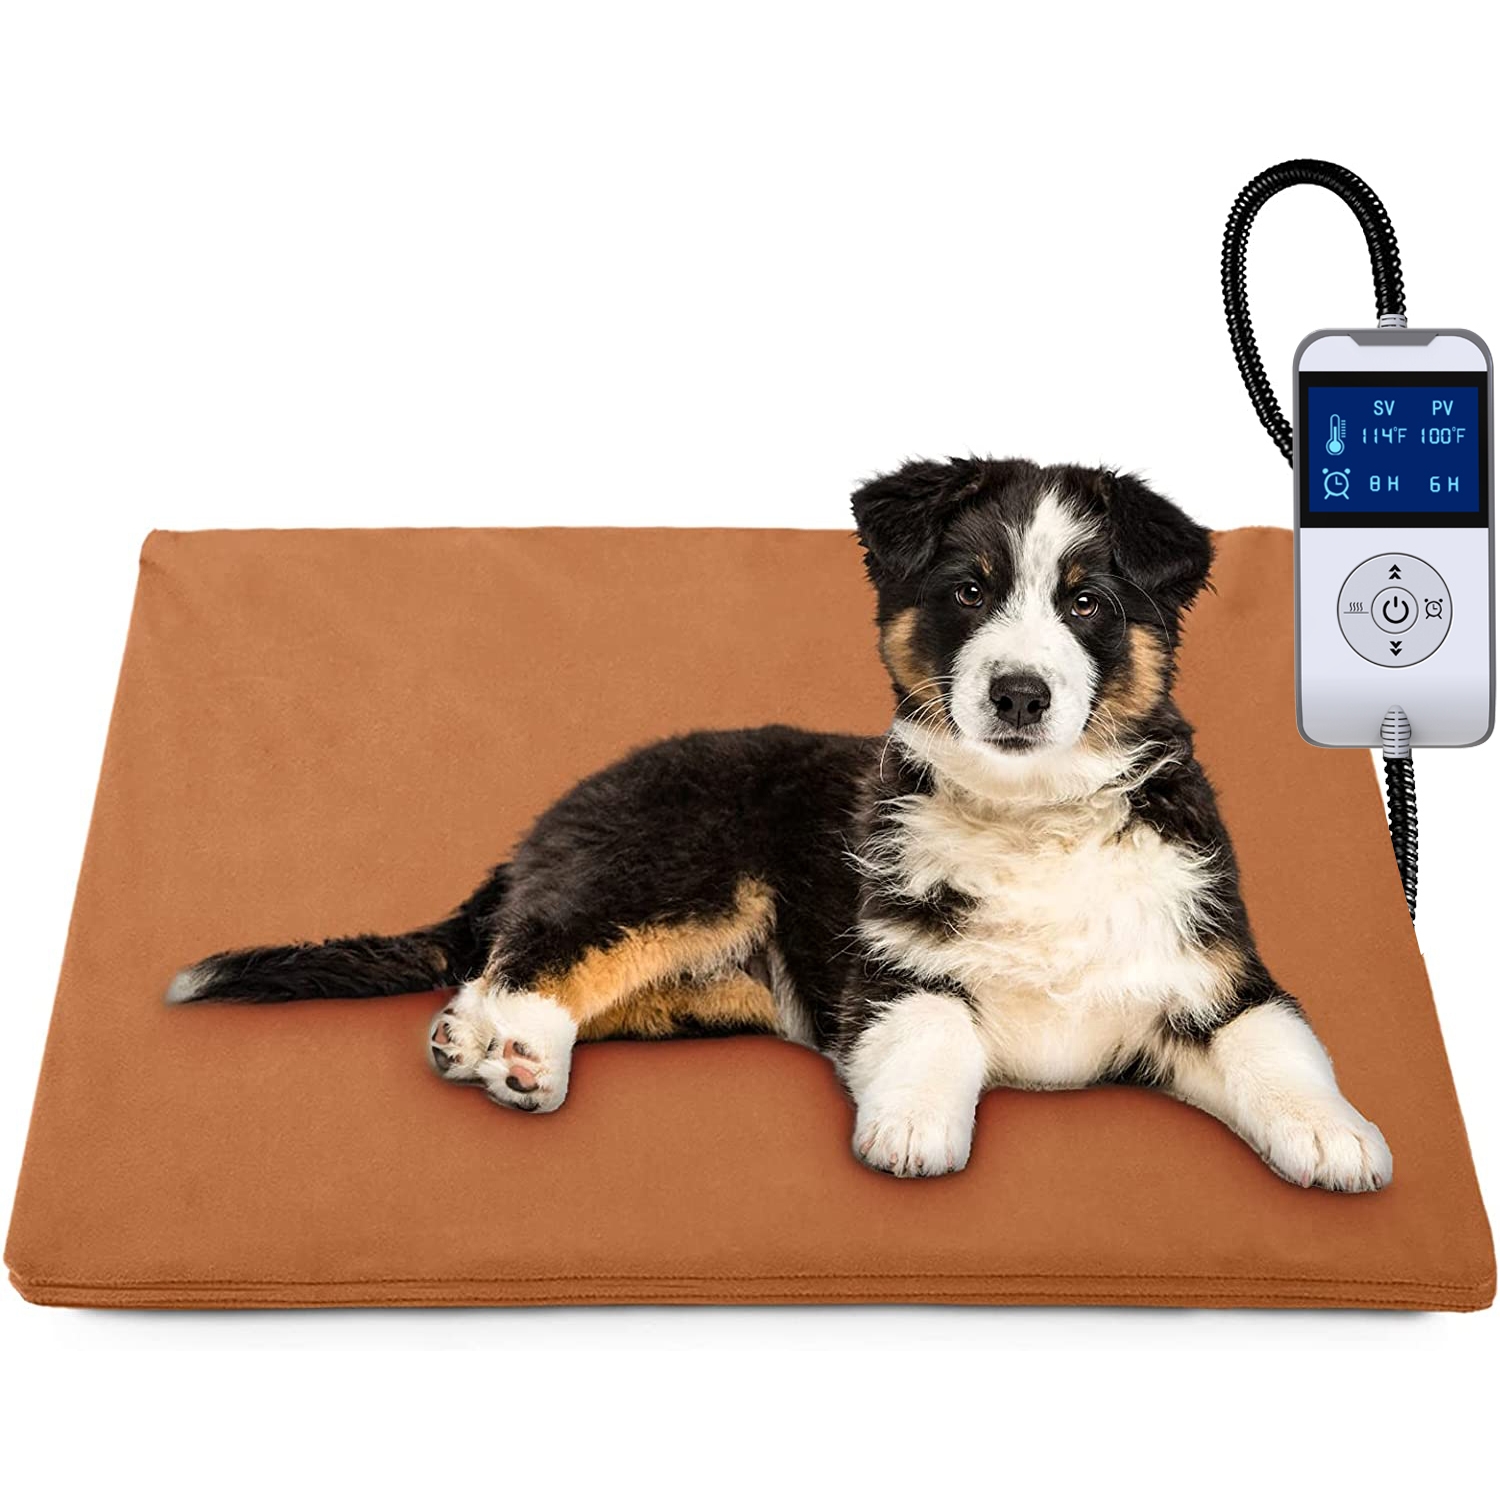 Pet heating pad for cat kitten dog puppies